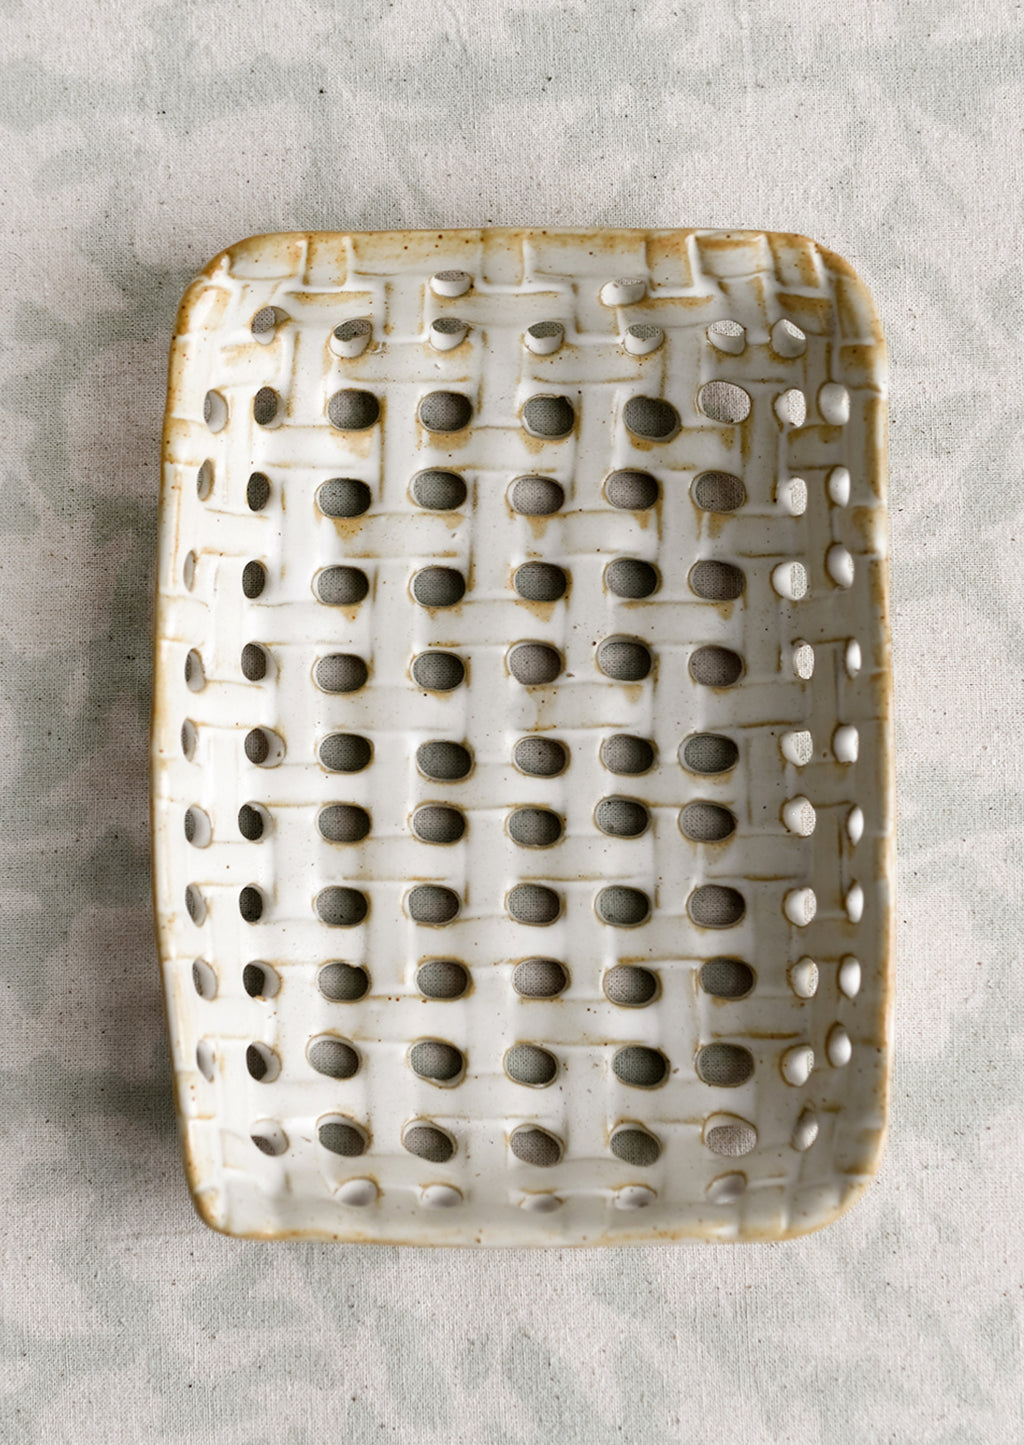 3: A rectangular shaped ceramic tray with open basketweave design.